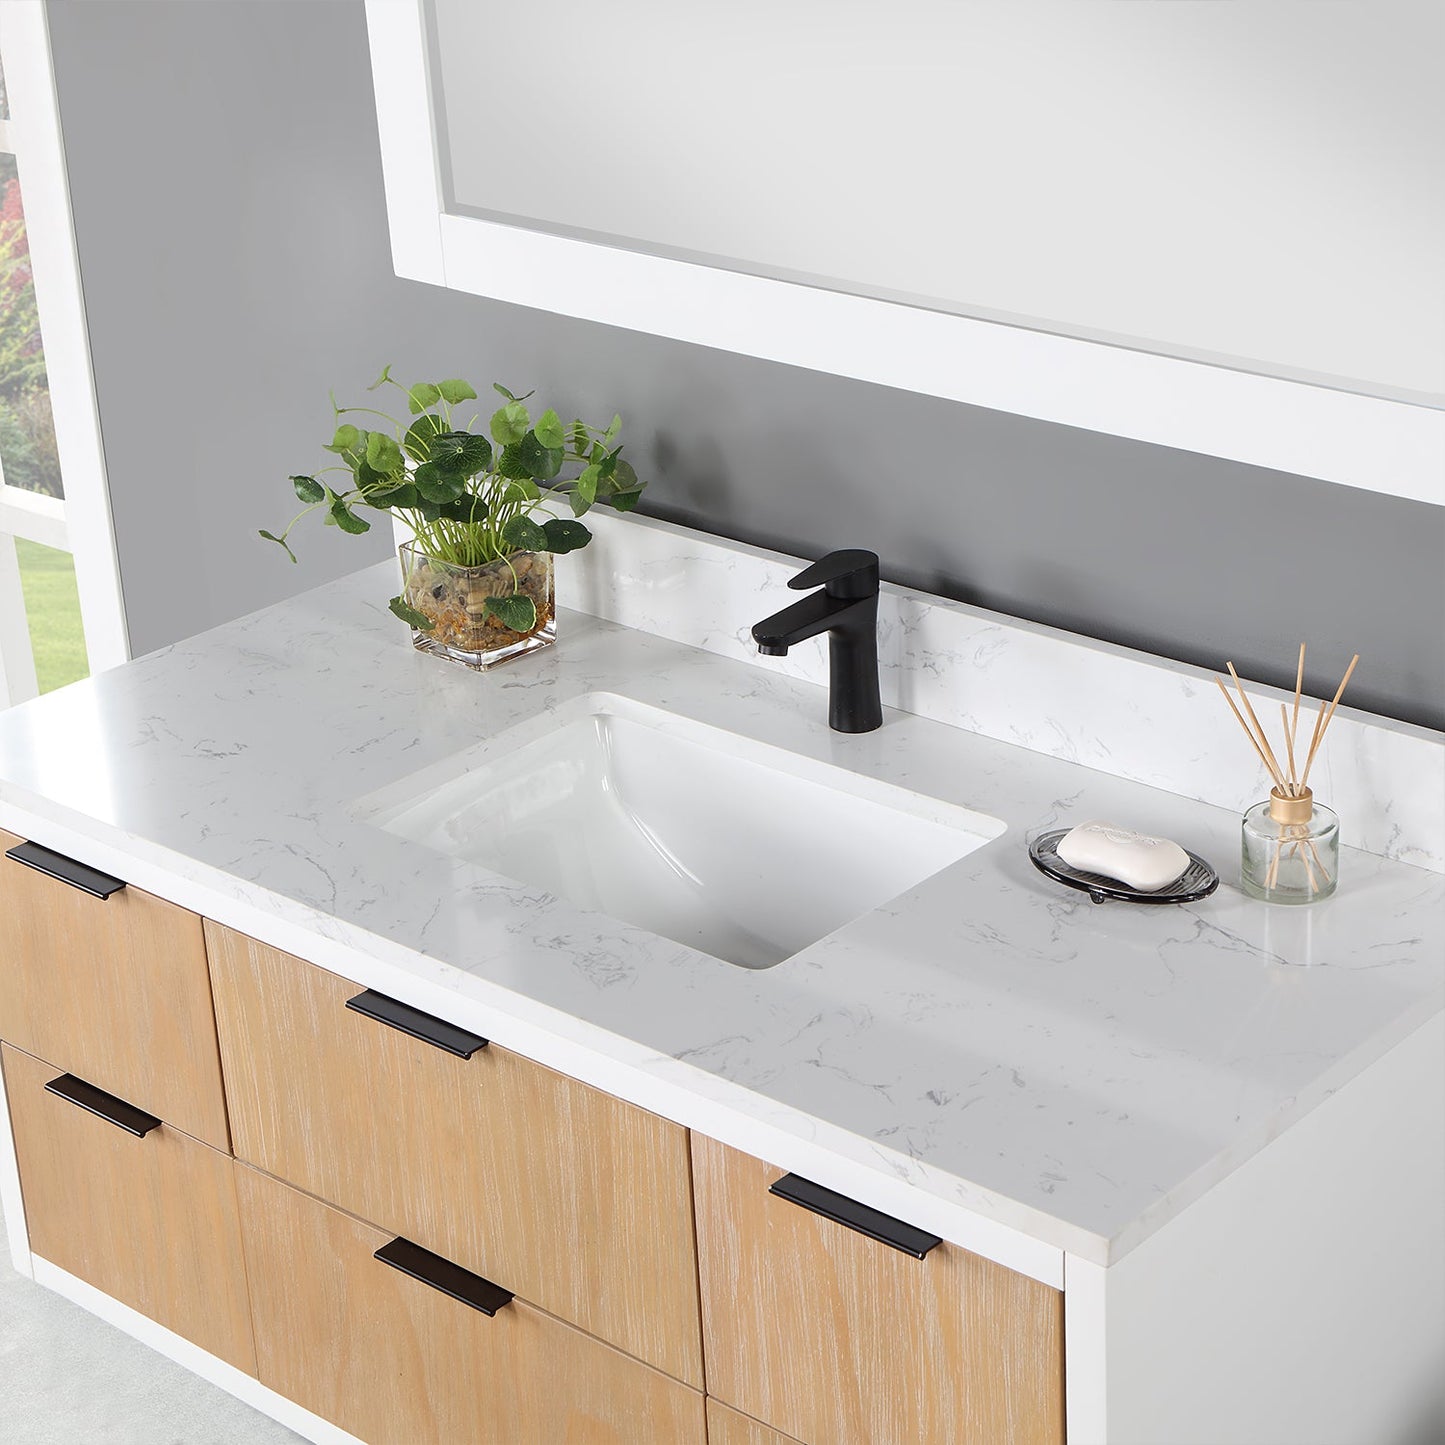 Dione 48" Single Bathroom Vanity in Weathered Pine with Aosta White Composite Stone Countertop with Mirror